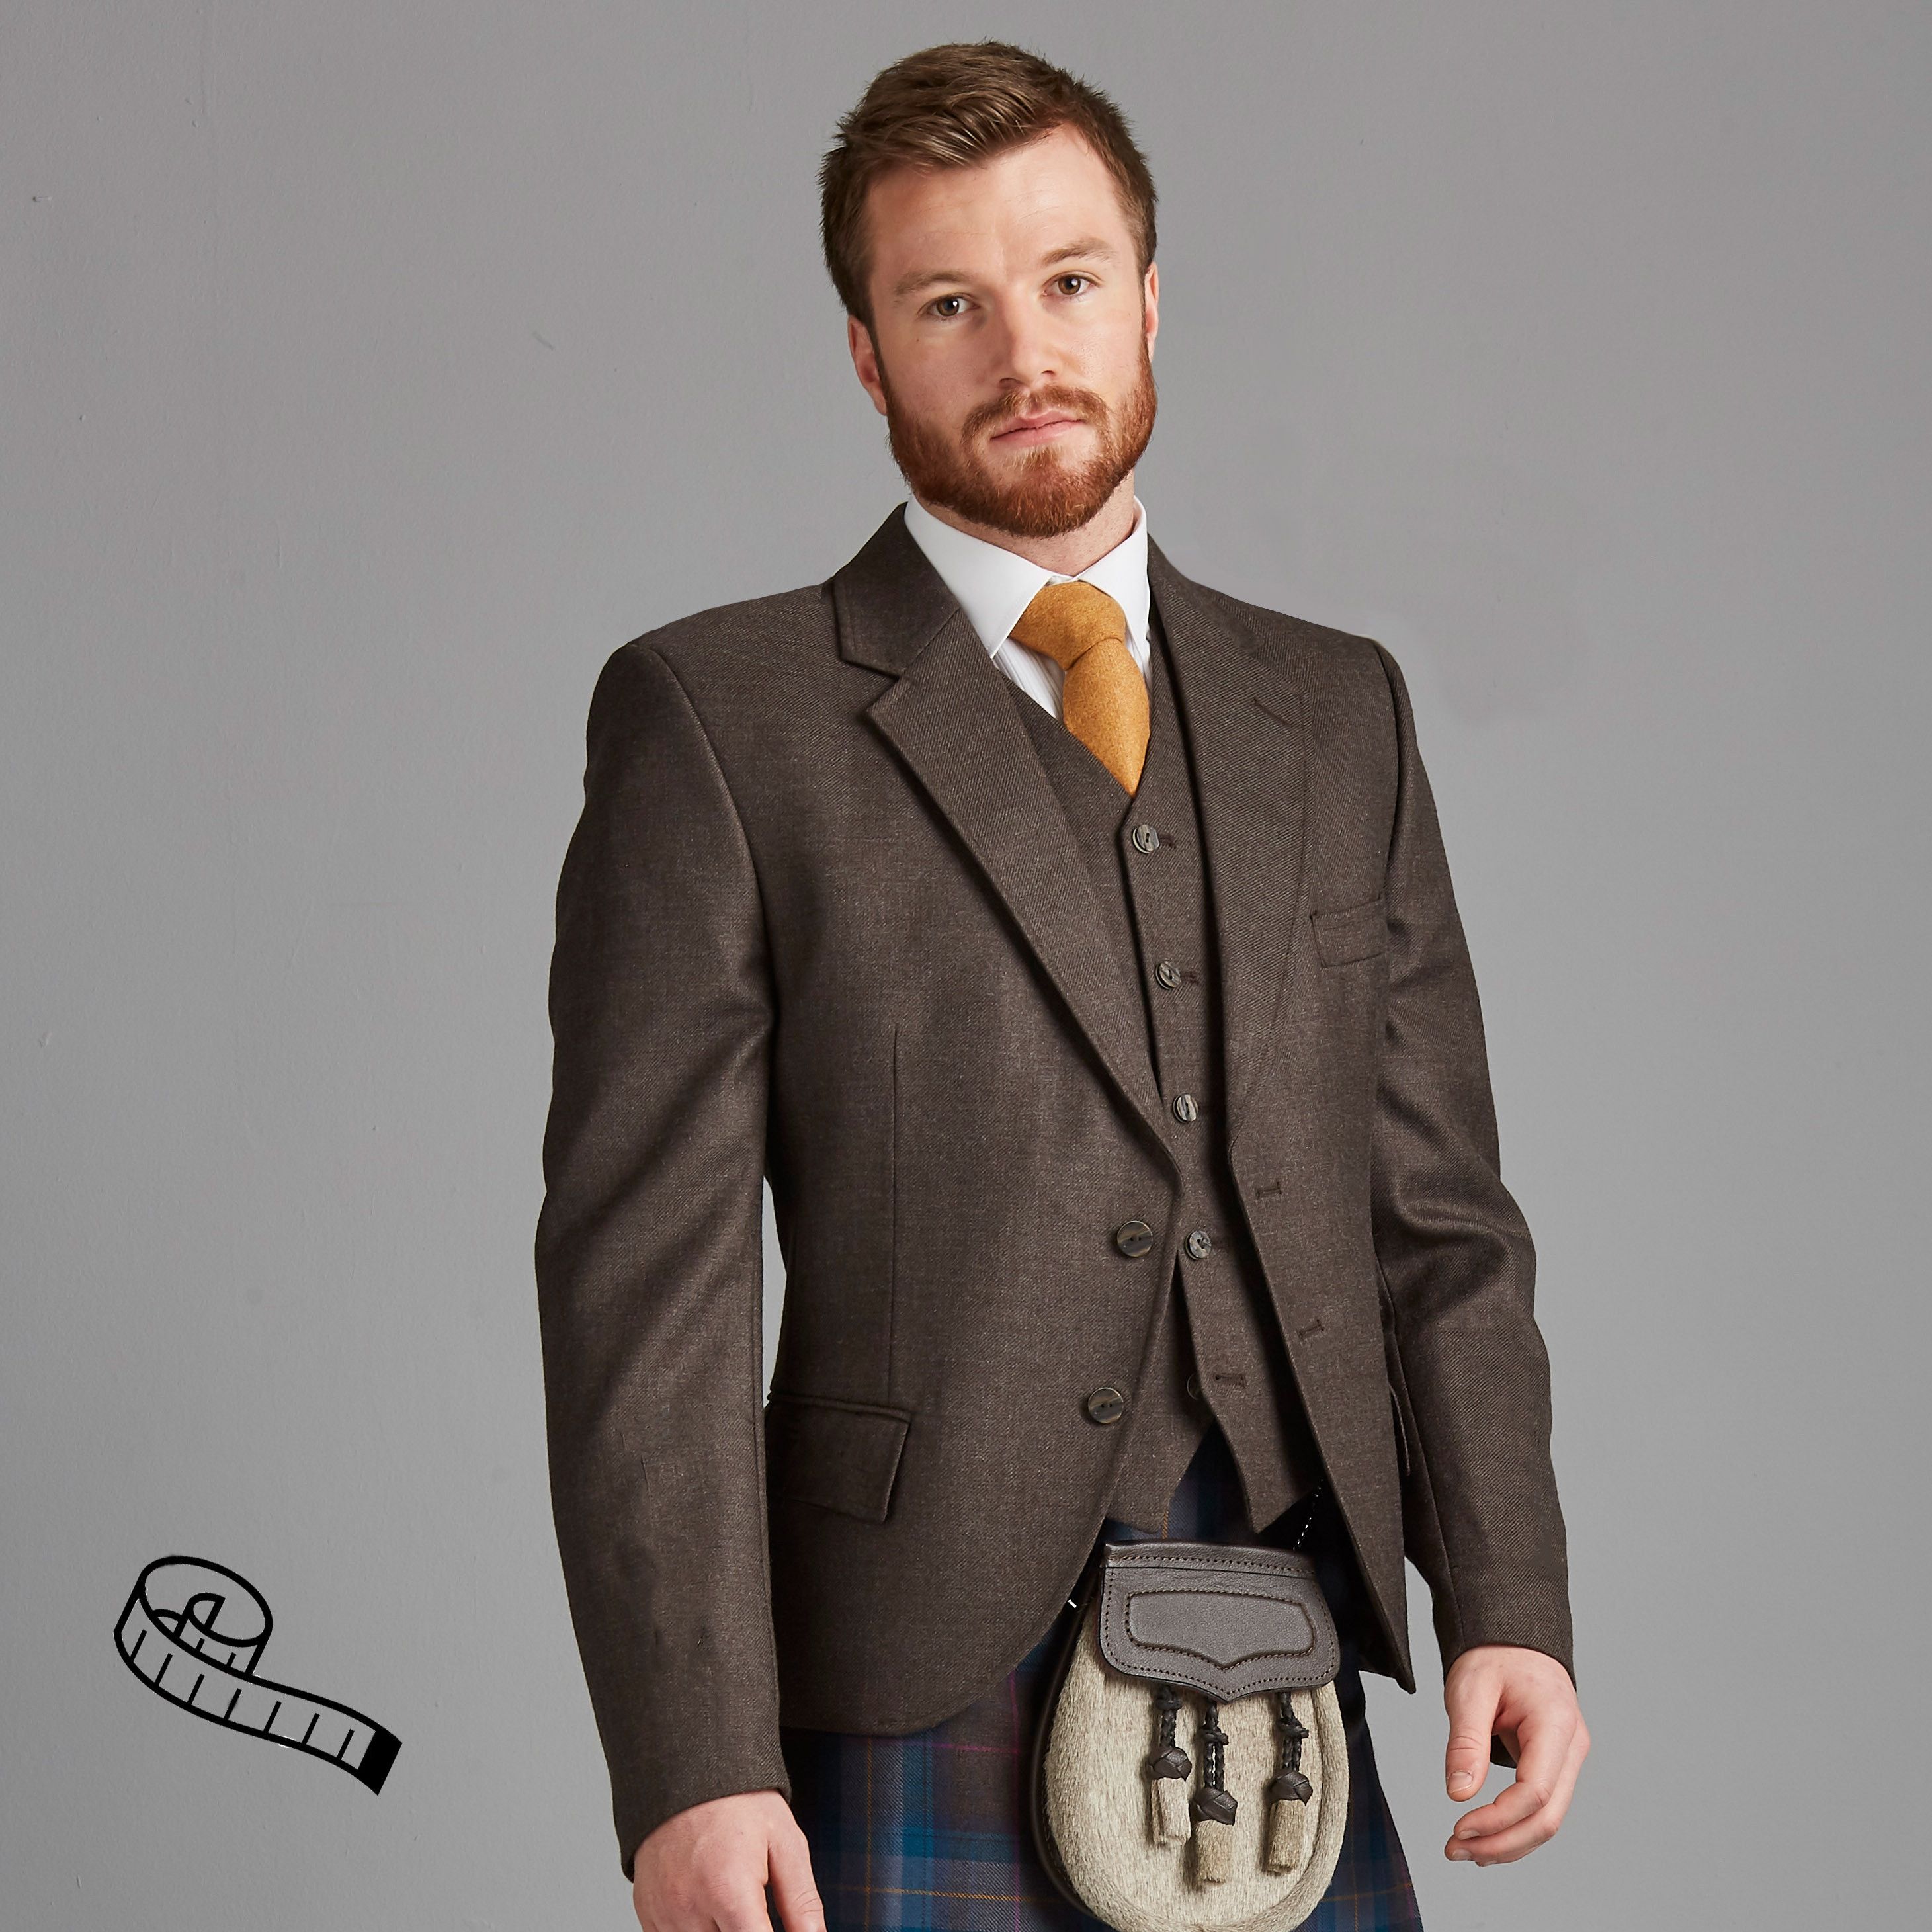 The Kinloch Anderson Day Kilt Jacket in any tweed made to order